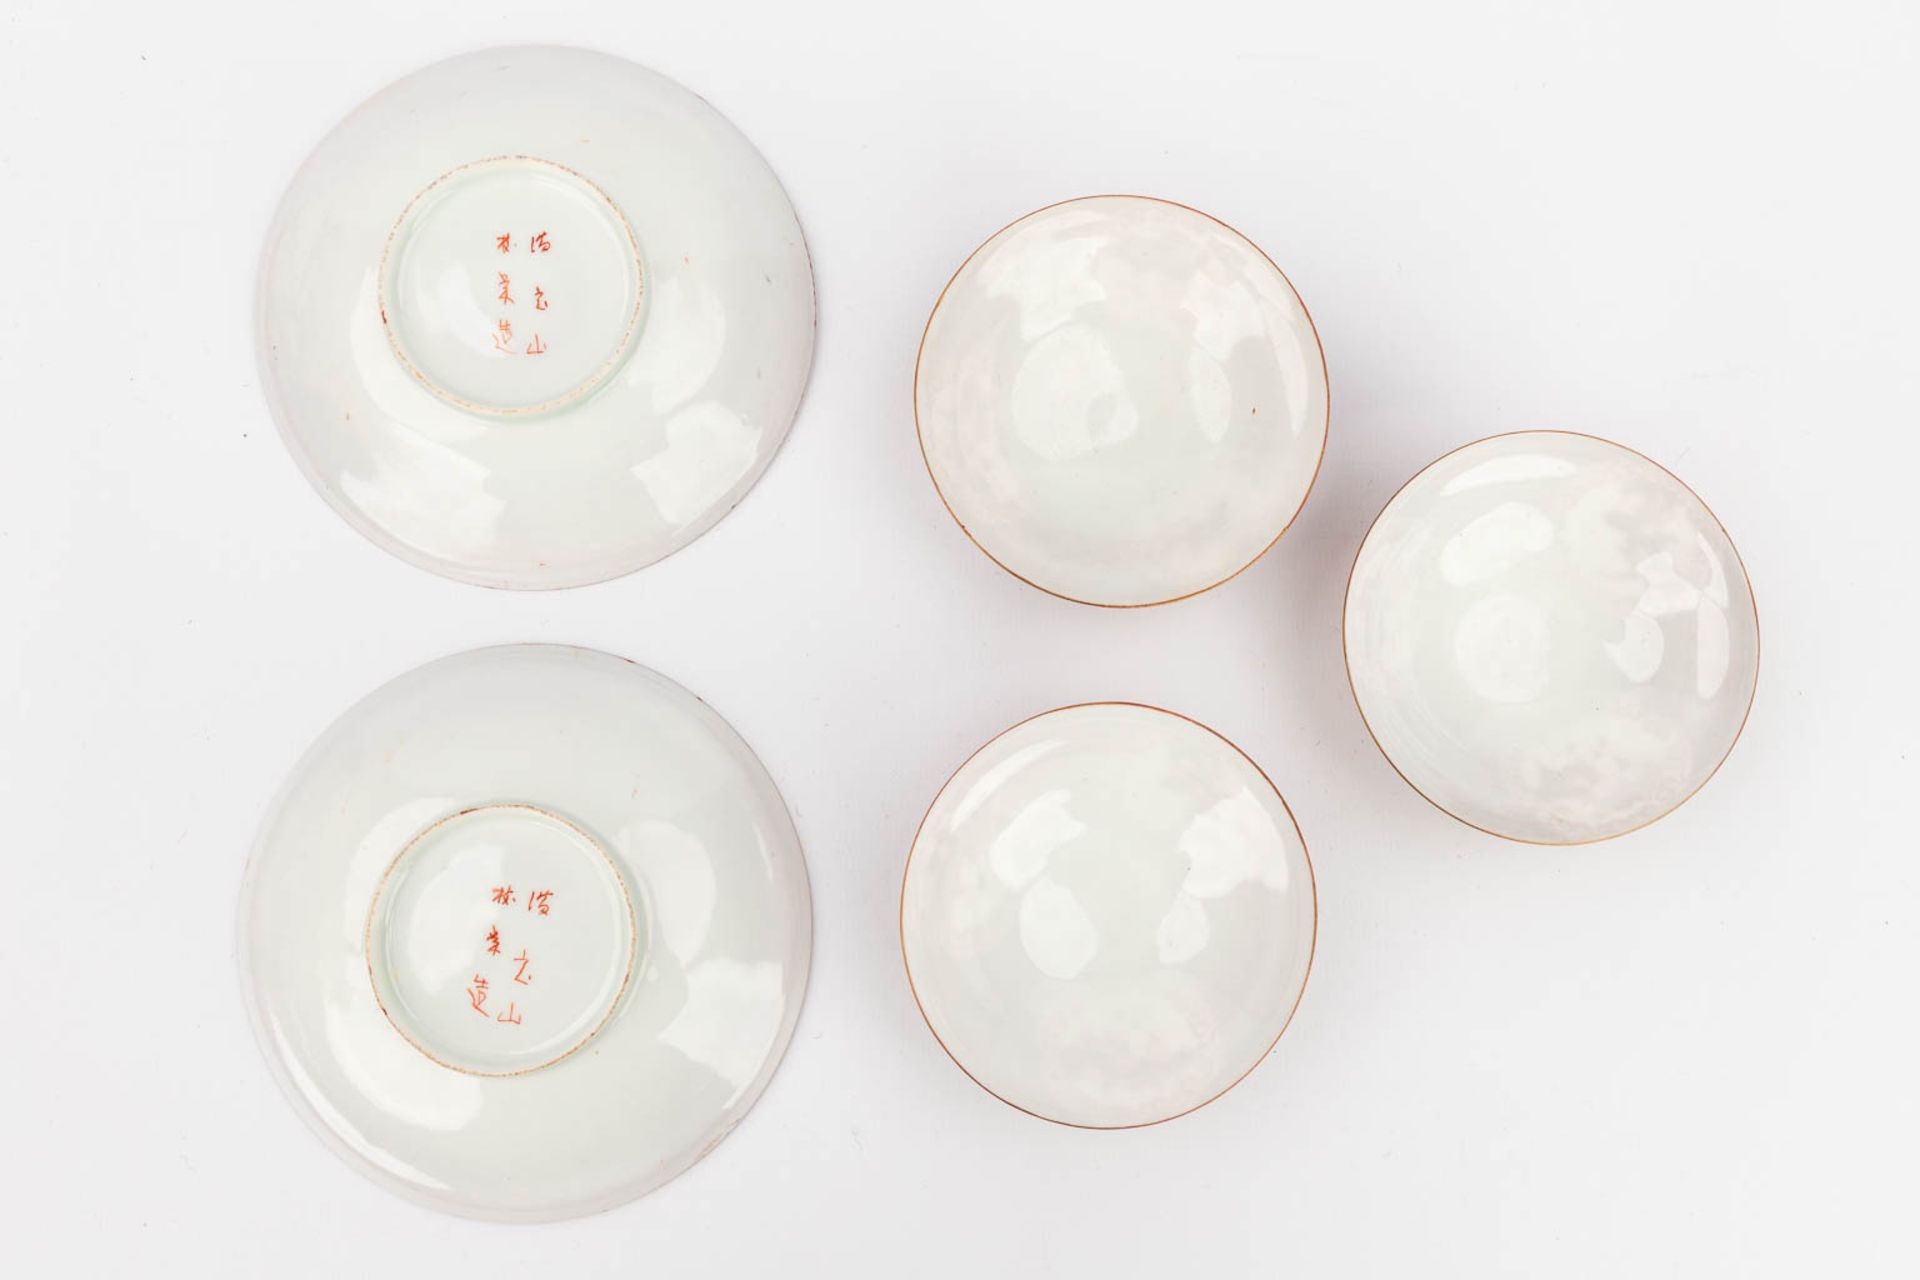 A large collection of bowls and saucers, eggshell porcelain, Japan, 20th C. (H:9 x D:9 cm) - Image 9 of 24